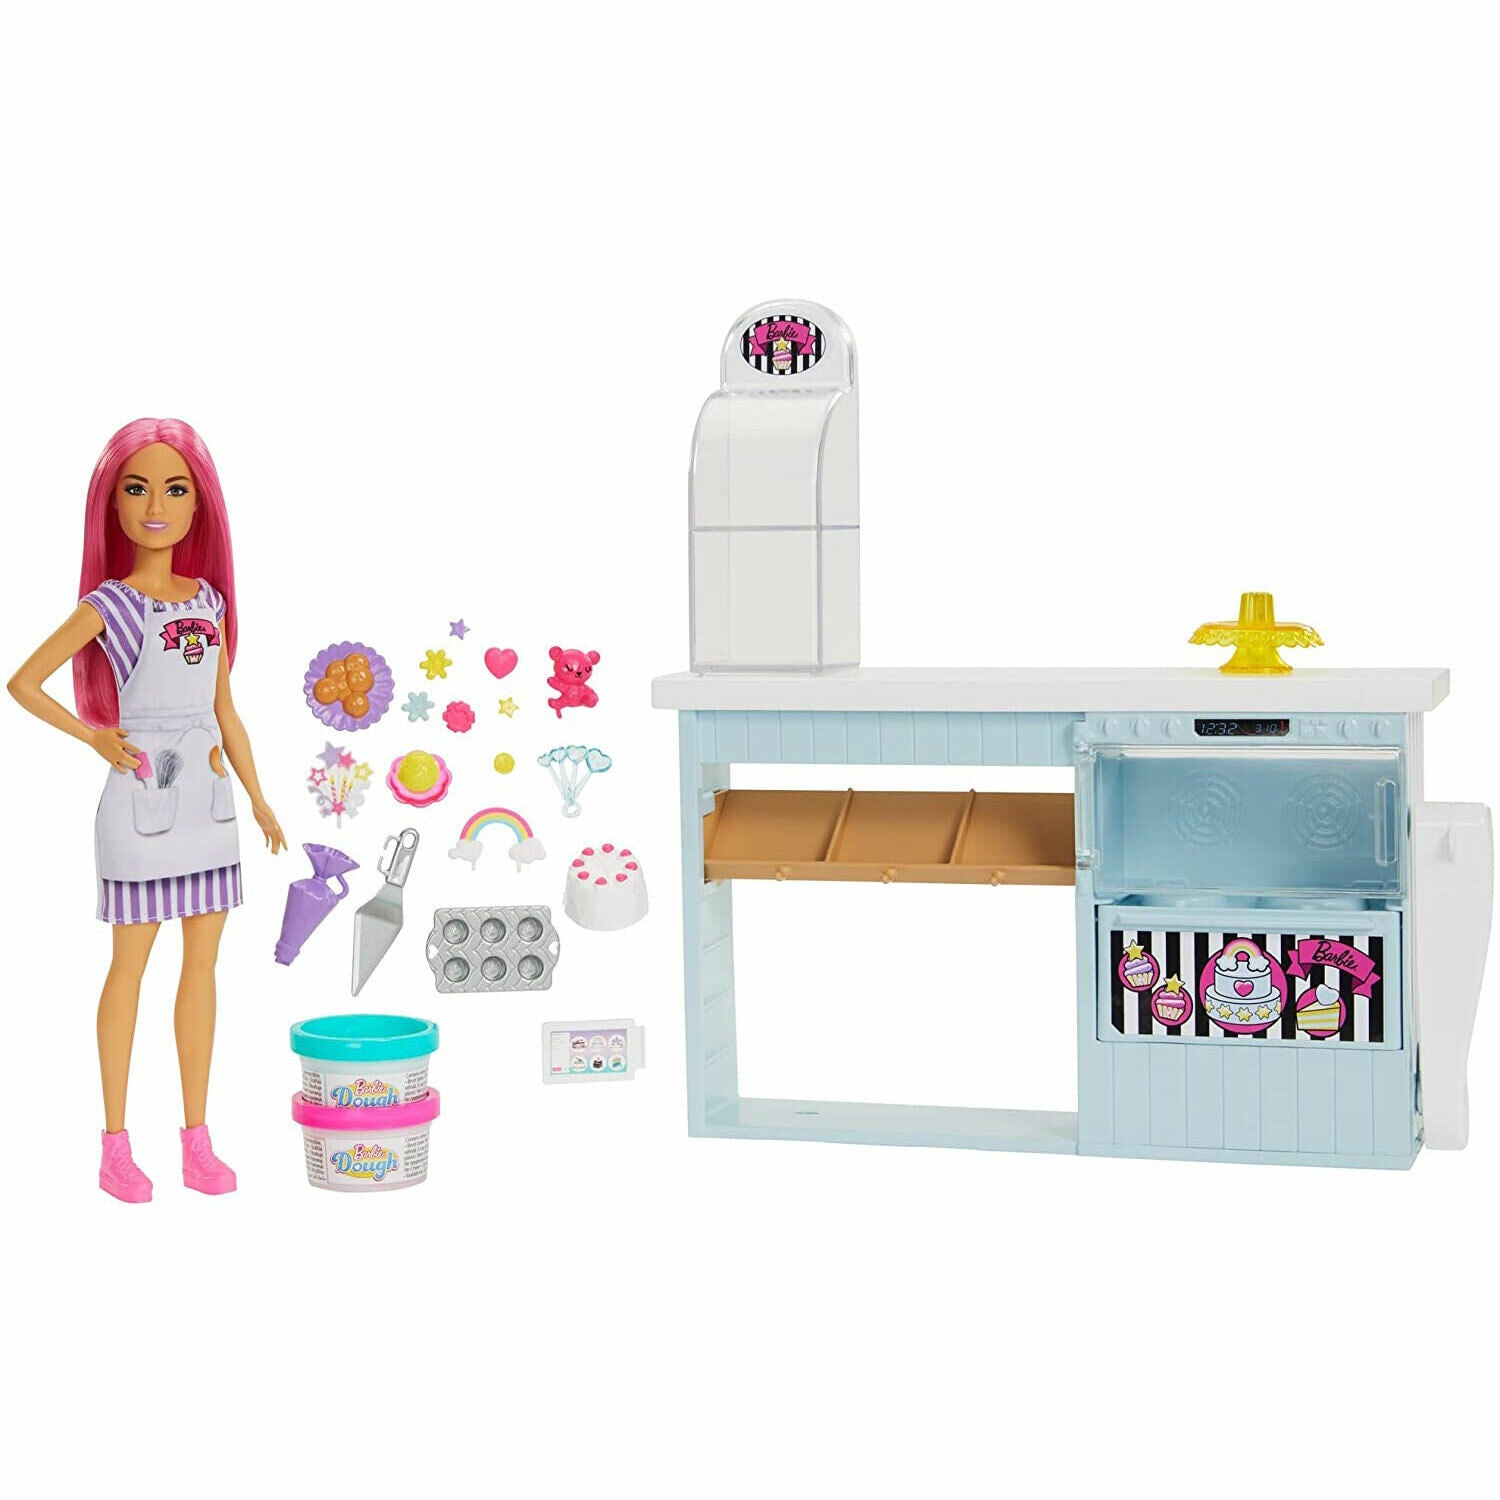 New Barbie Bakery Playset - Hours of Fun for Kids!